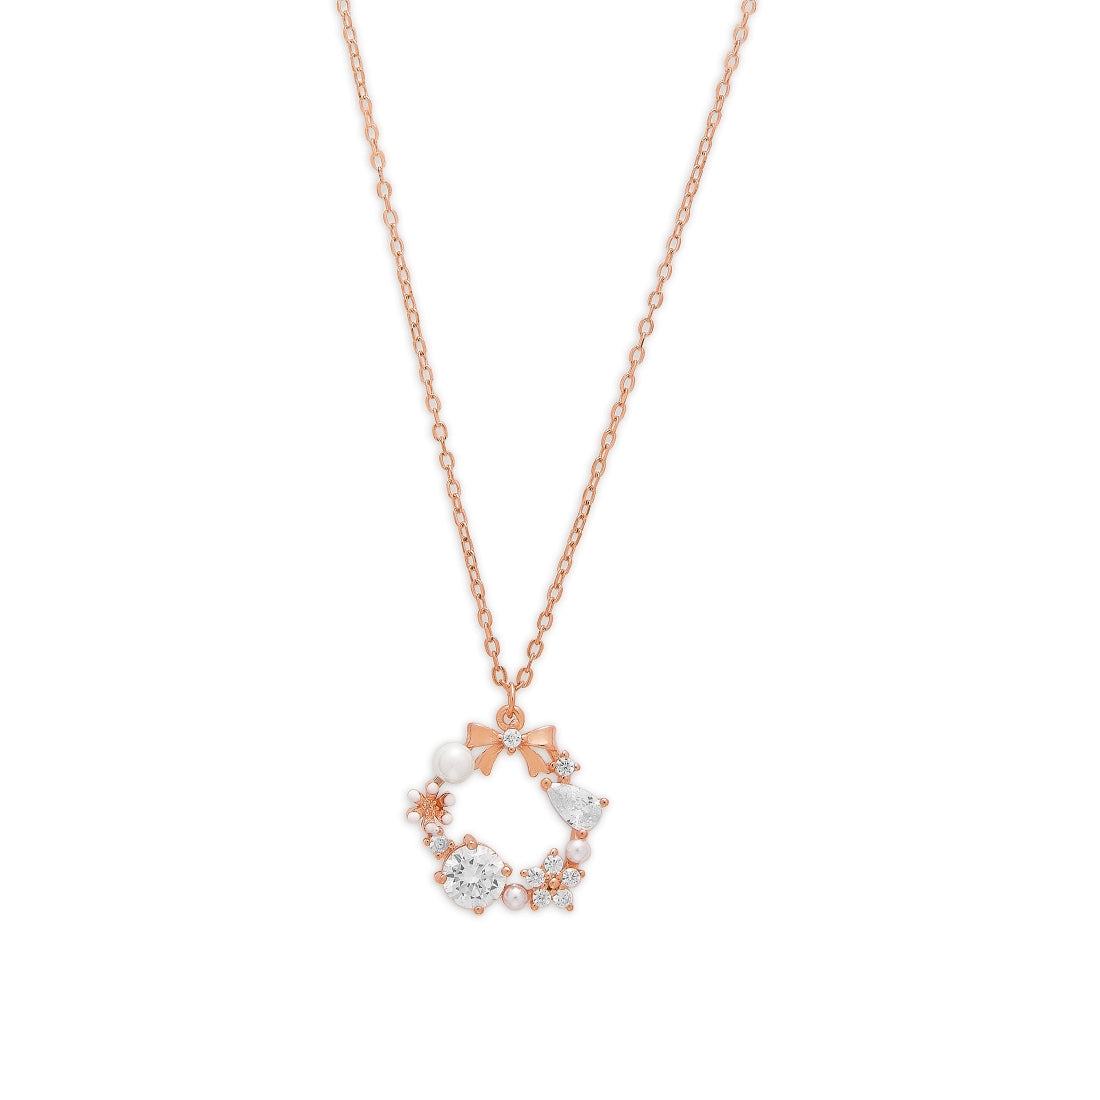 Ethereal Bloom 925 Sterling Silver Rose Gold-Plated Necklace